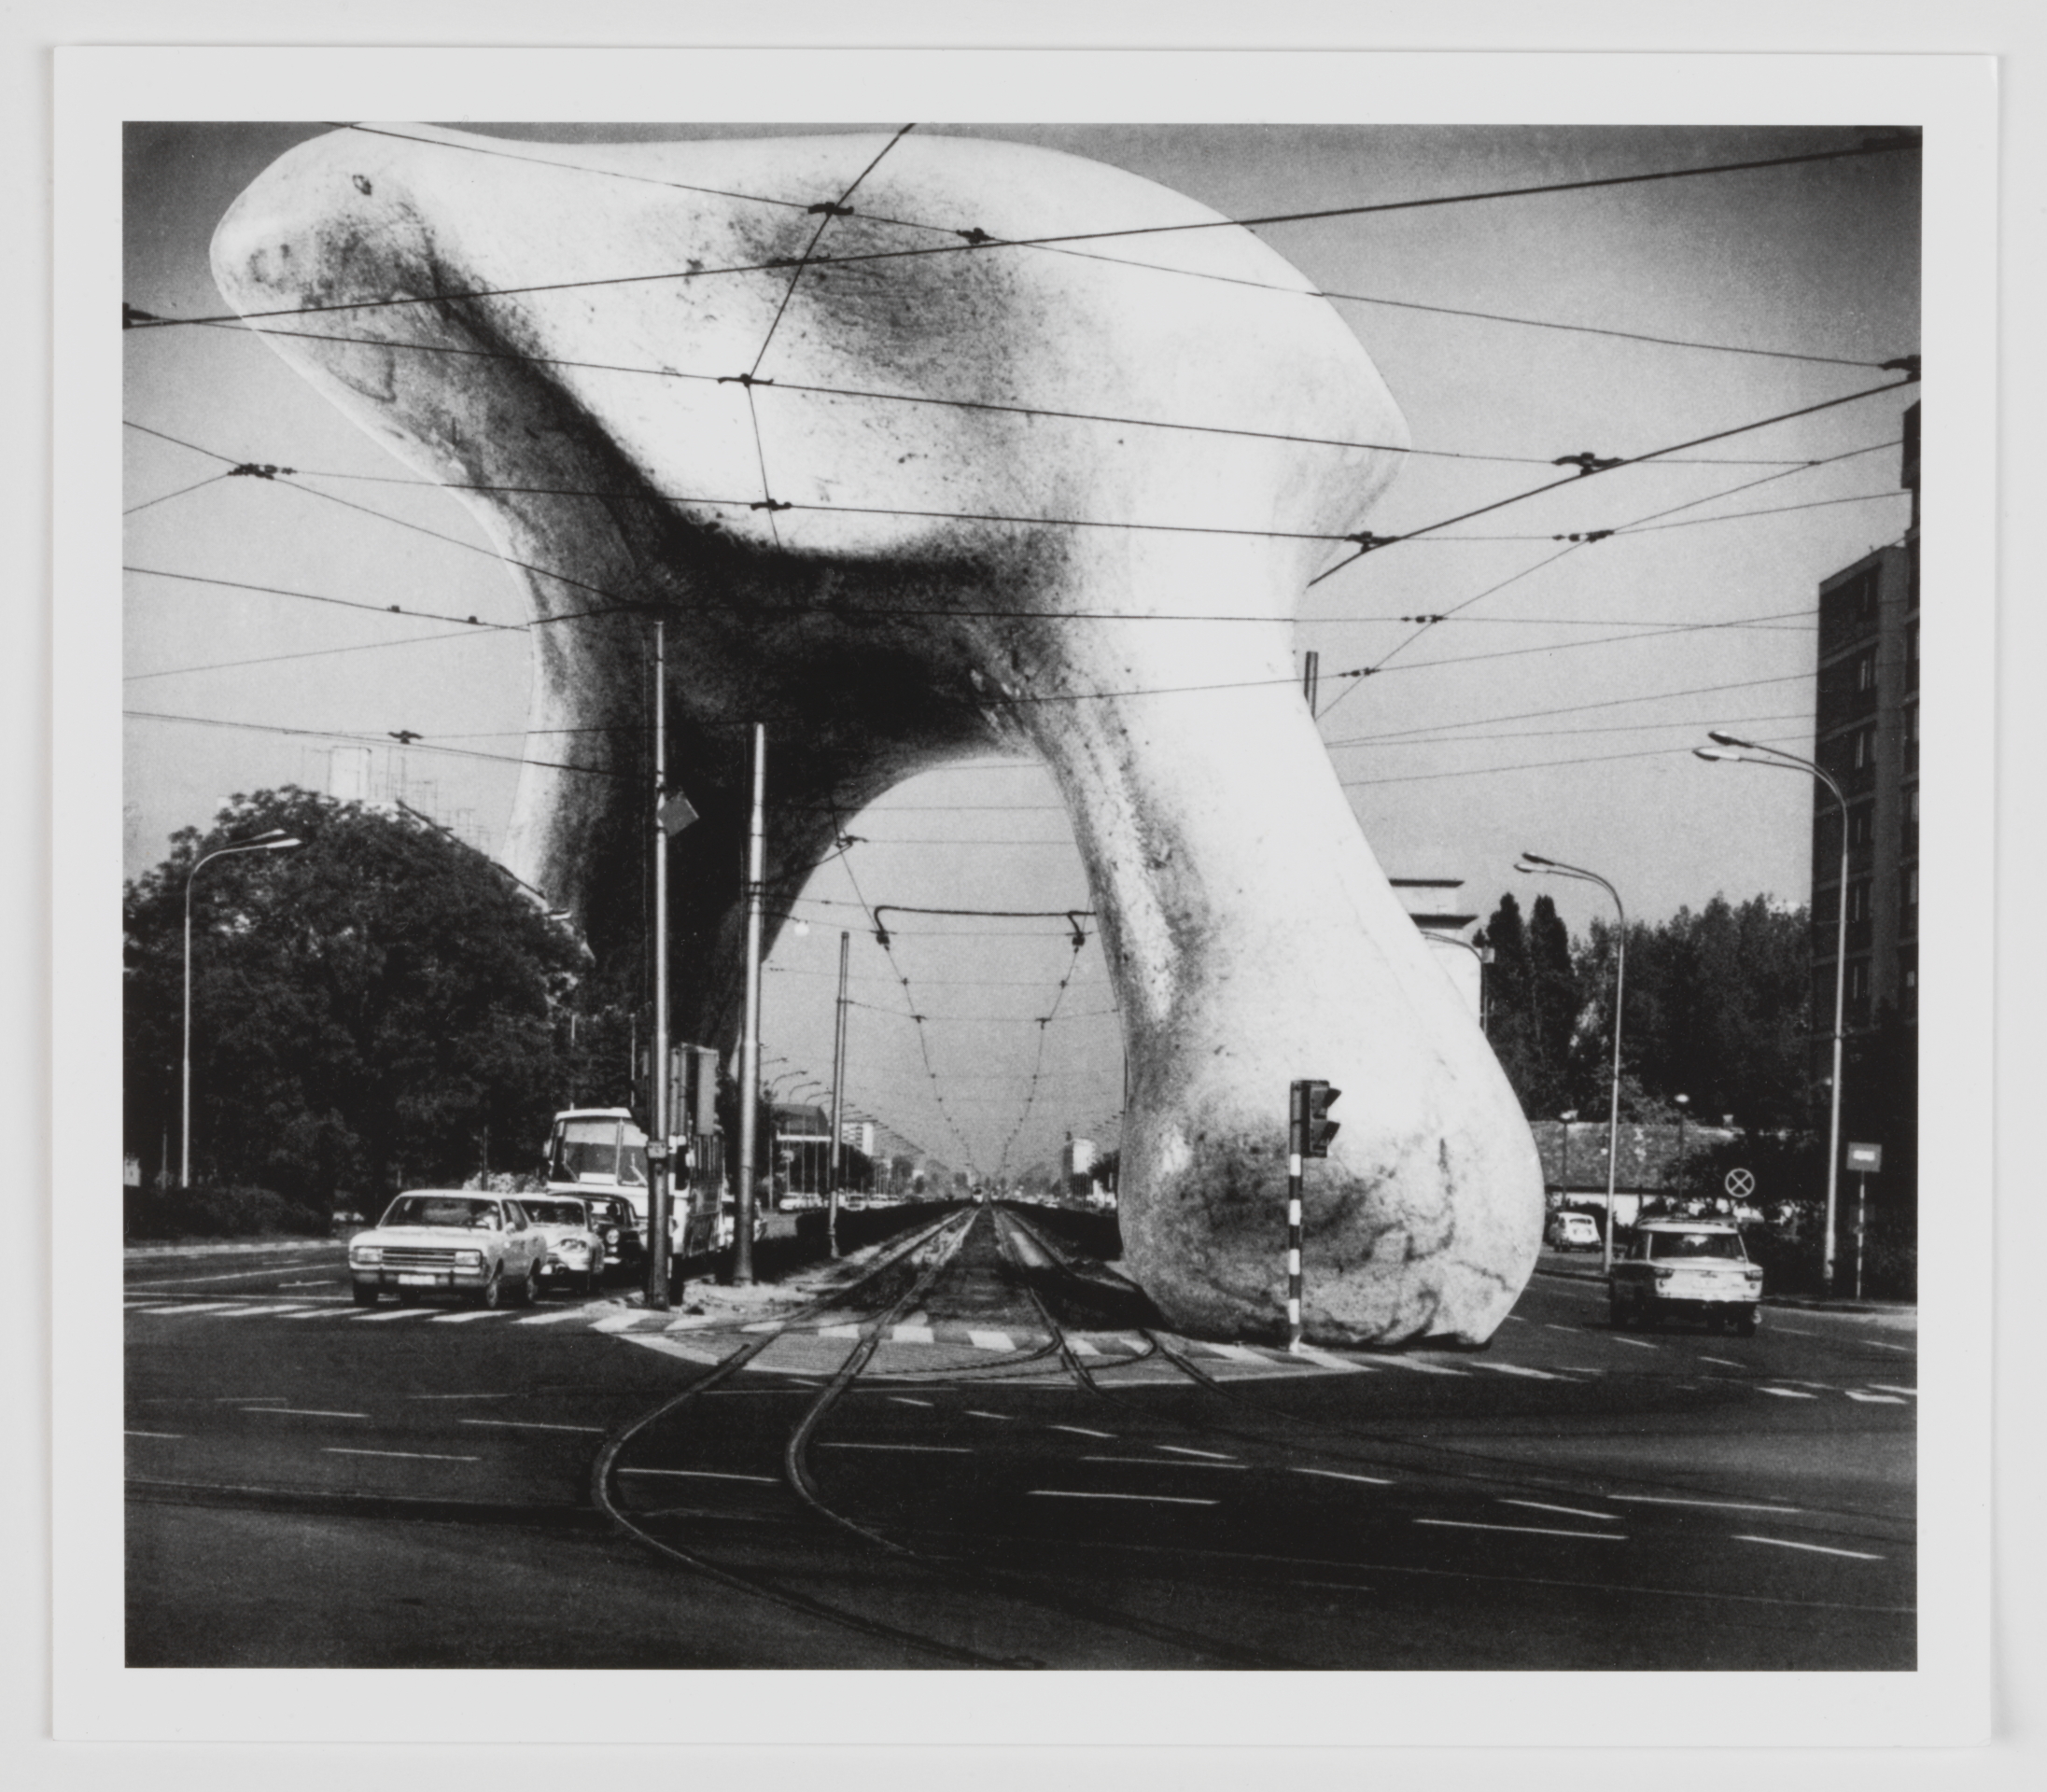 Call It as You Like, collage on b/w photograph, 26 x 22 cm, 1971